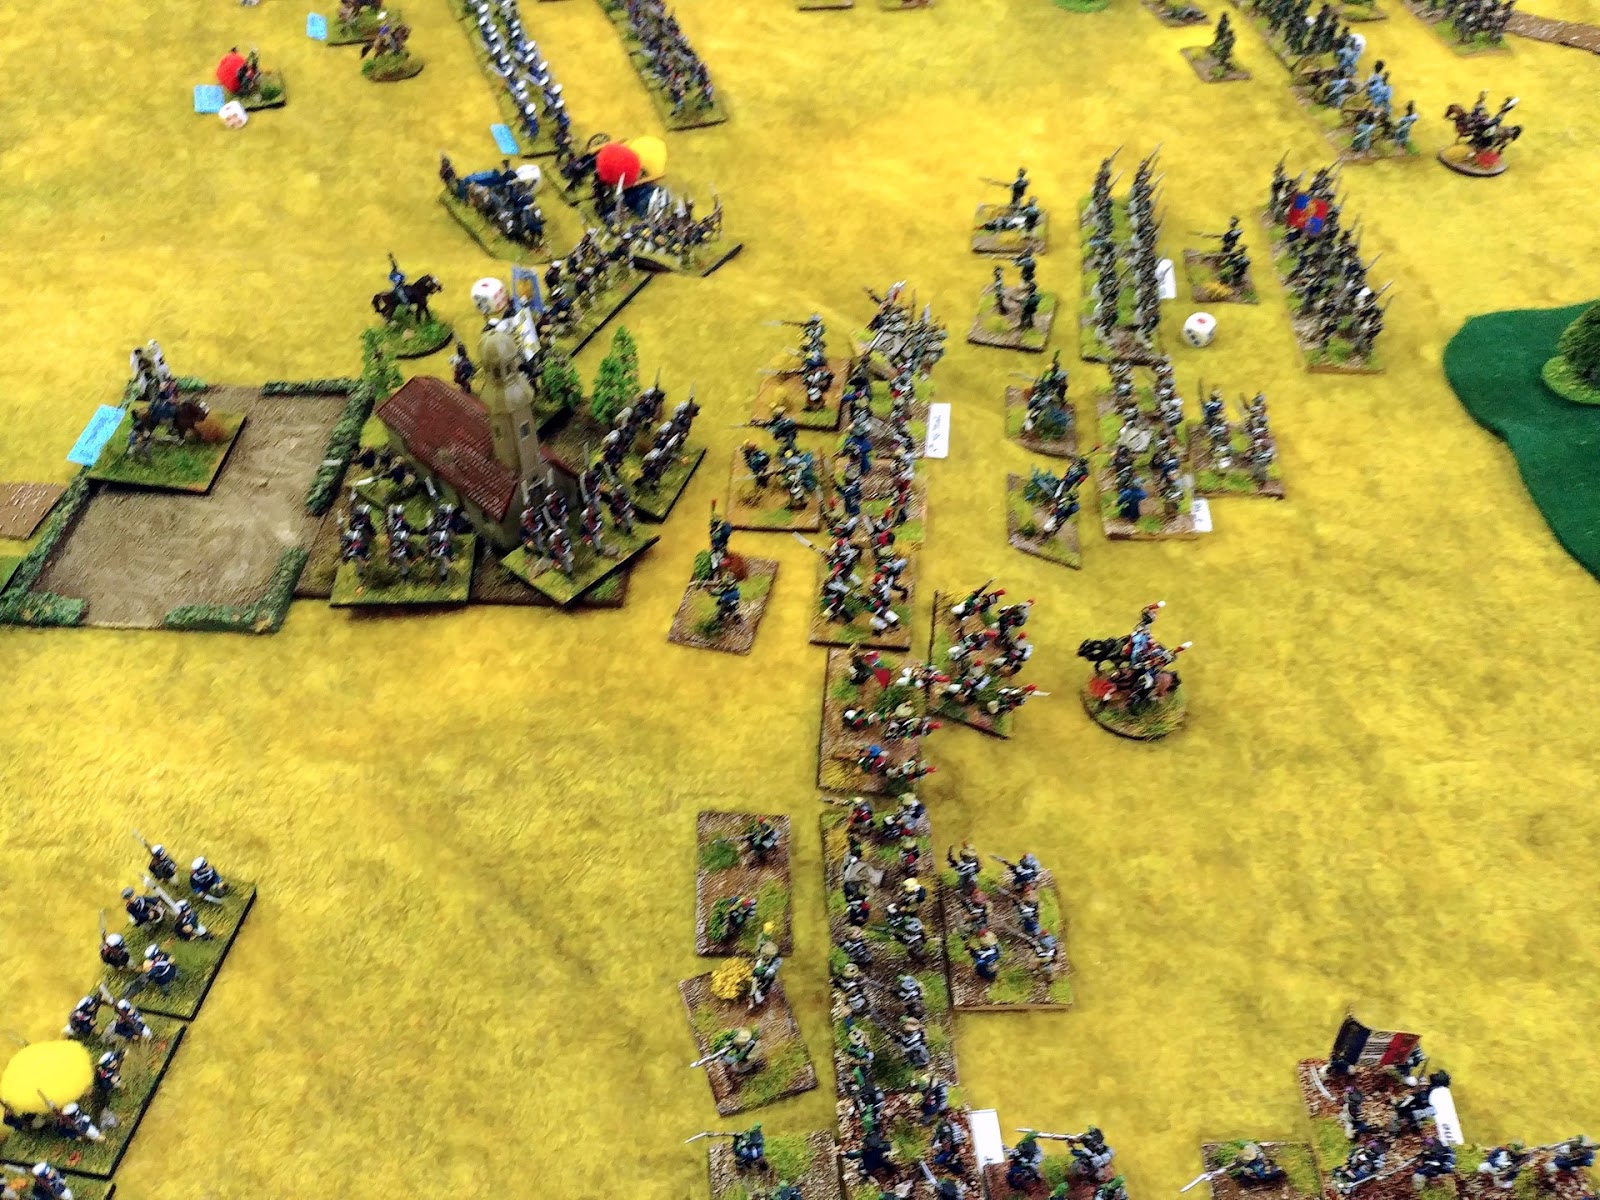 Sgt Steiner's Wargaming Blog: Epic Napoleonic encounter at Ulster ...